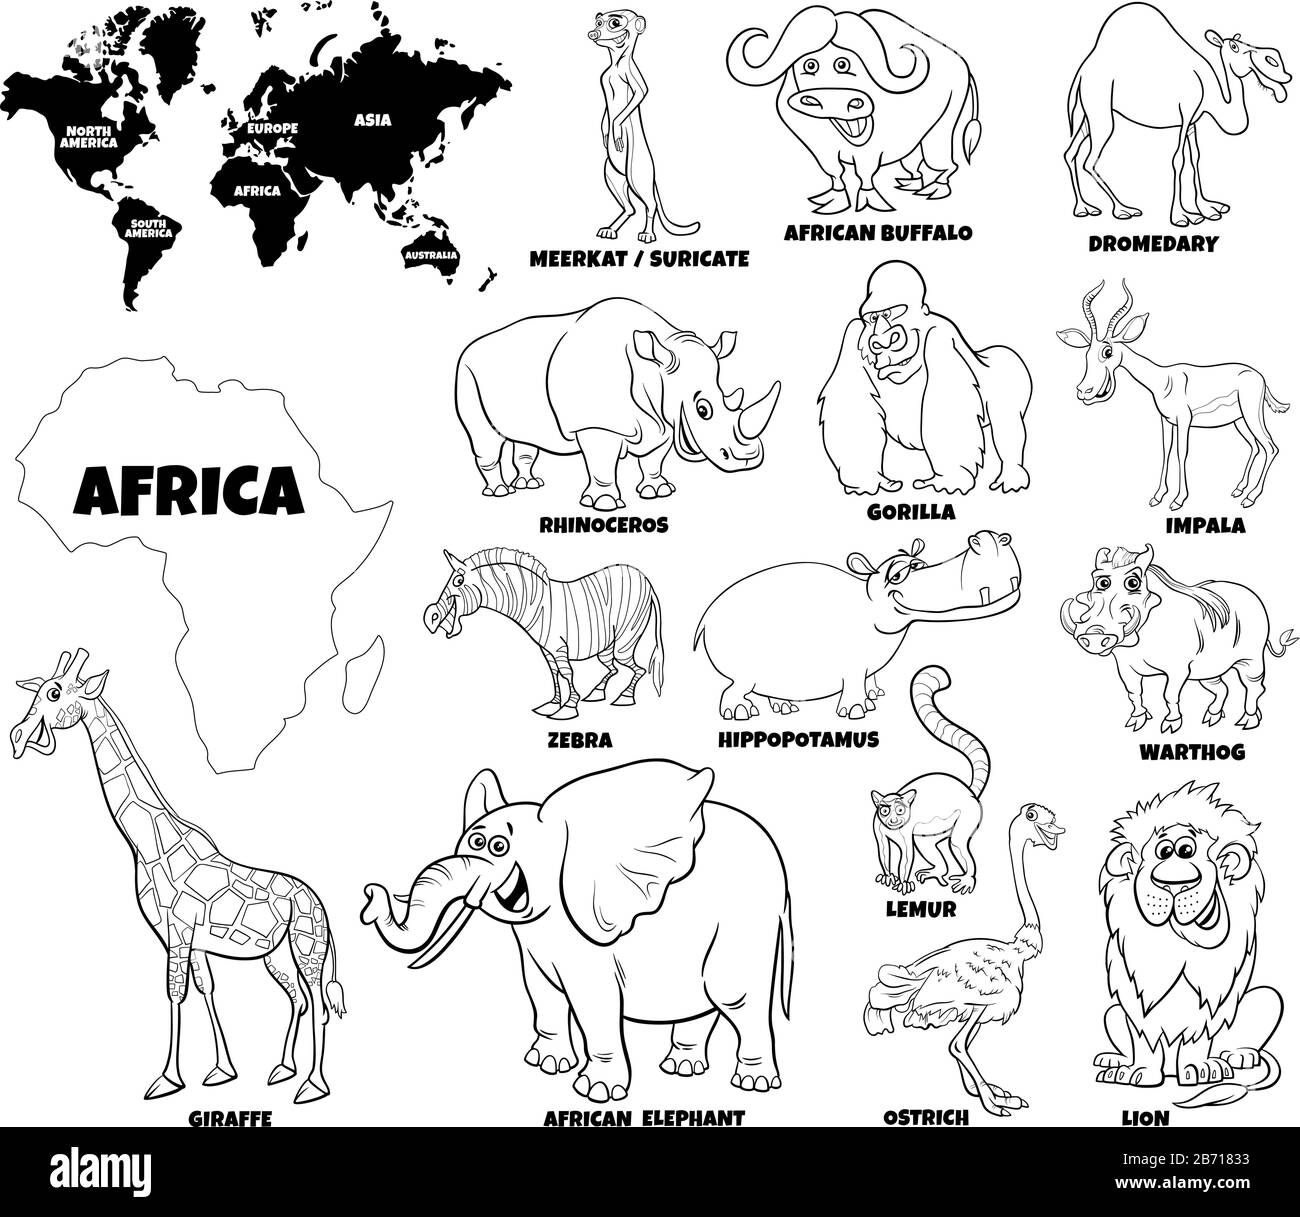 Black And White Educational Cartoon Illustration Of African Animals Set And World Map With Continents Shapes Coloring Book Page Illustration de Vecteur